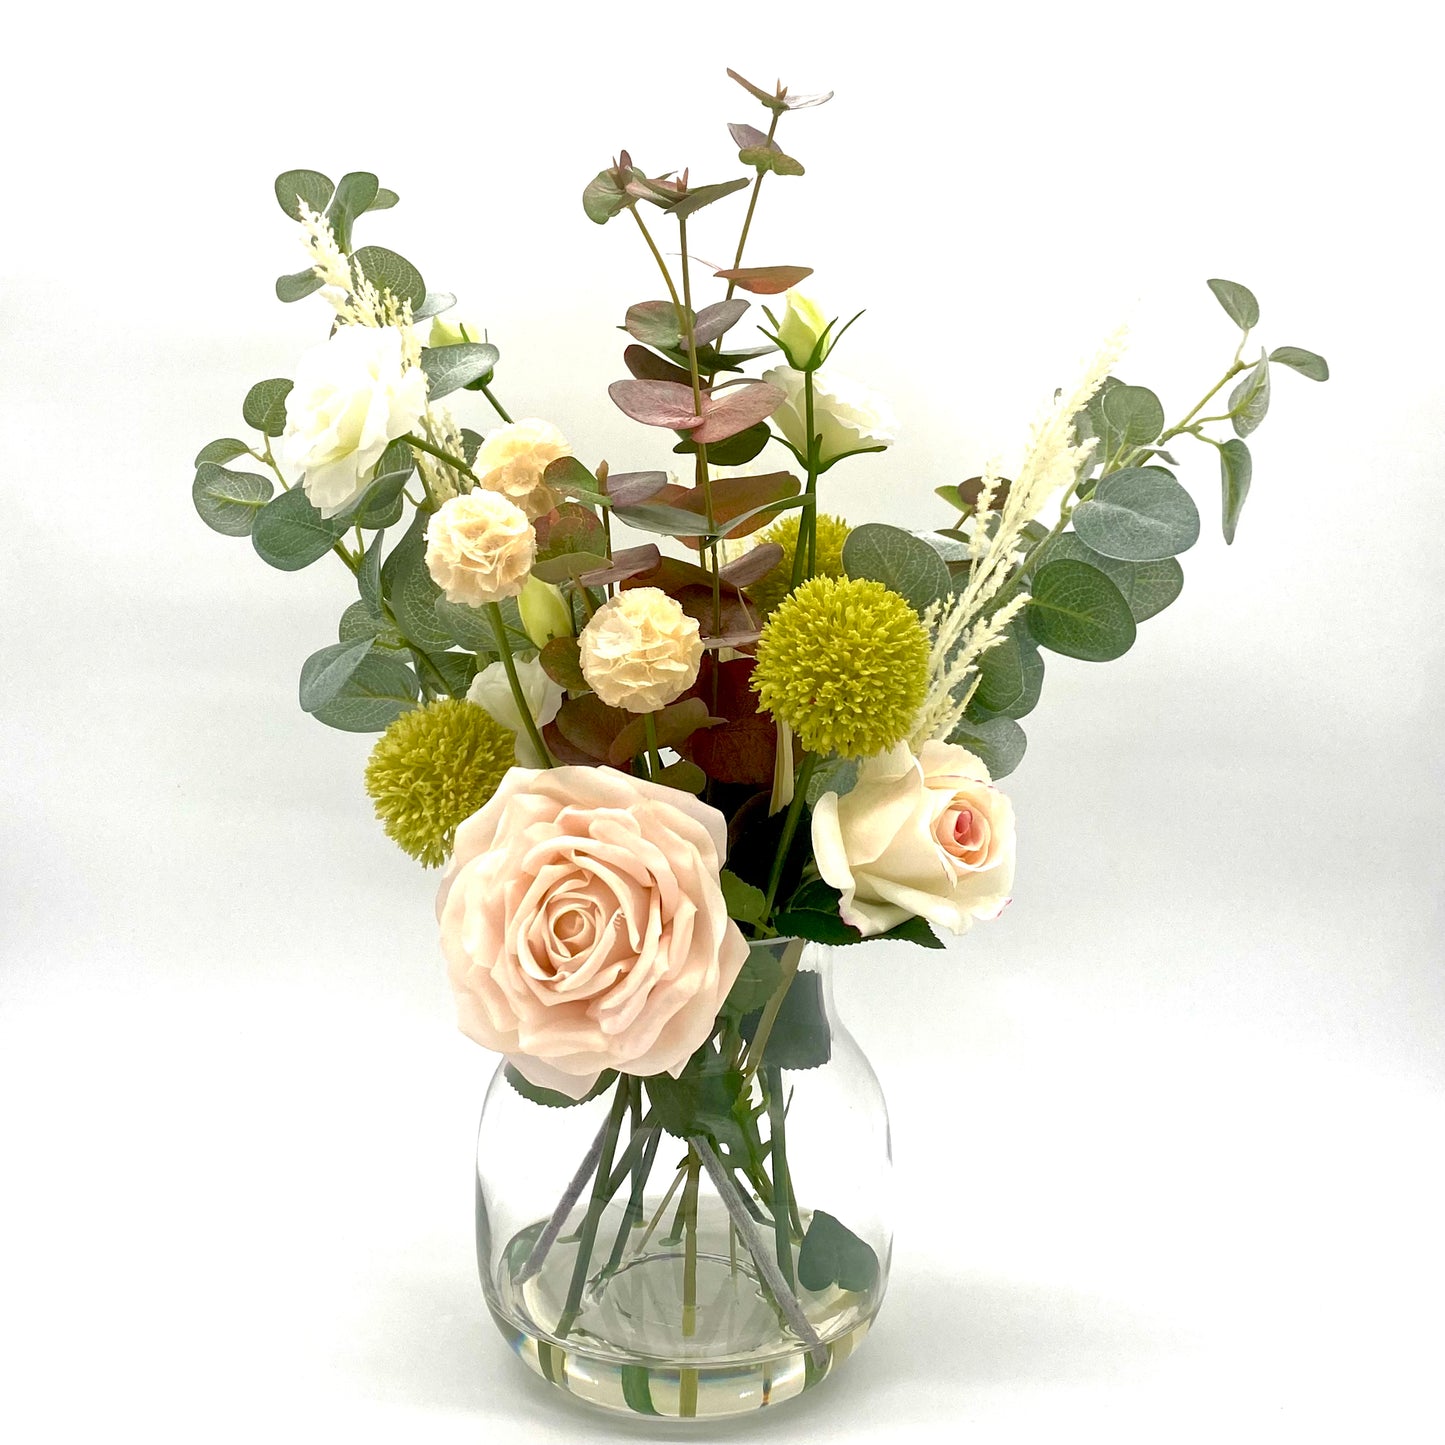 The Flowering Native One: Soft Pink Roses, White Lisianthas, and More in a Classic Glass Vase